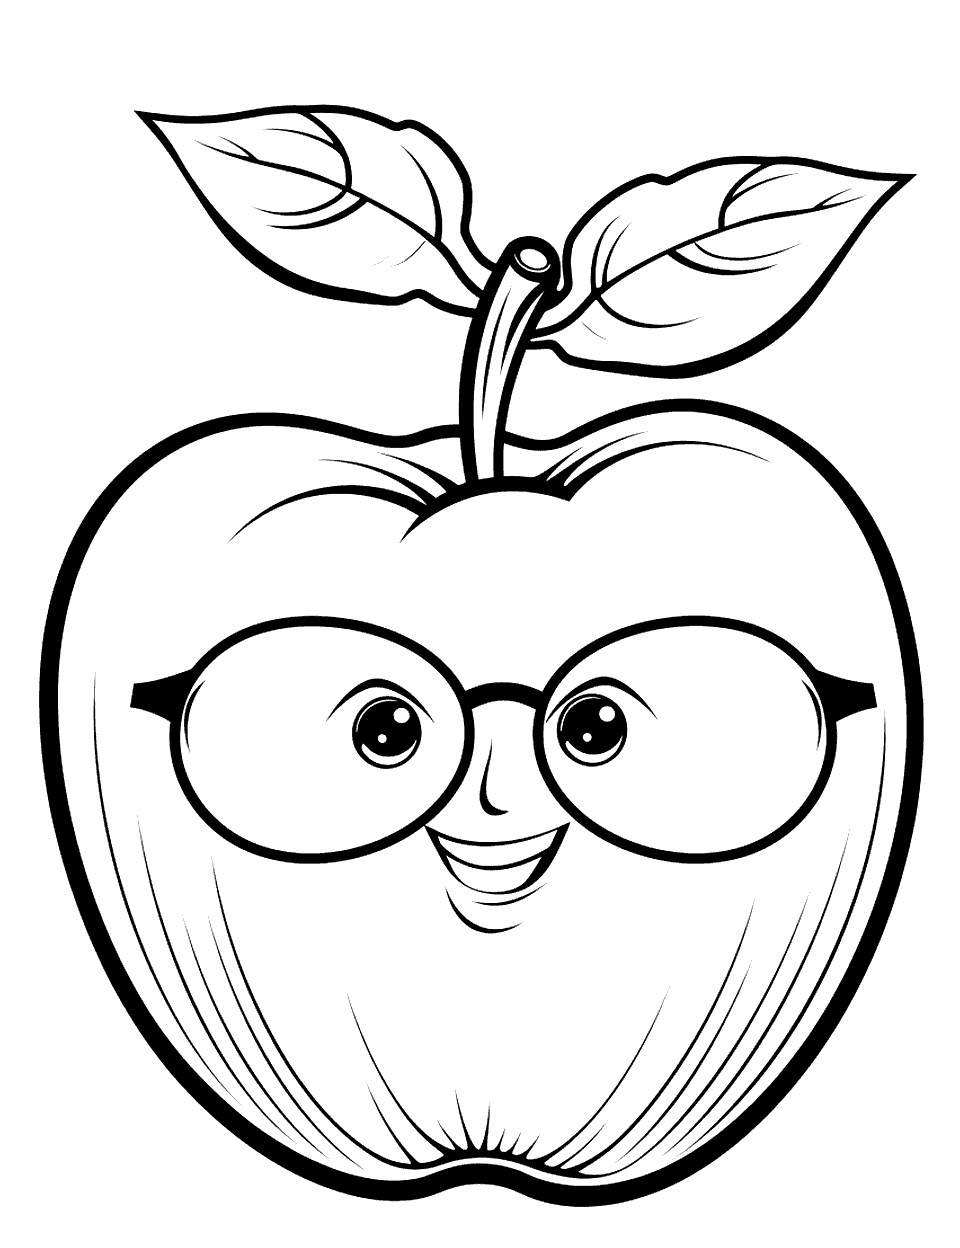 Apple with Sunglasses Coloring Page - A cool looking apple wearing glasses.